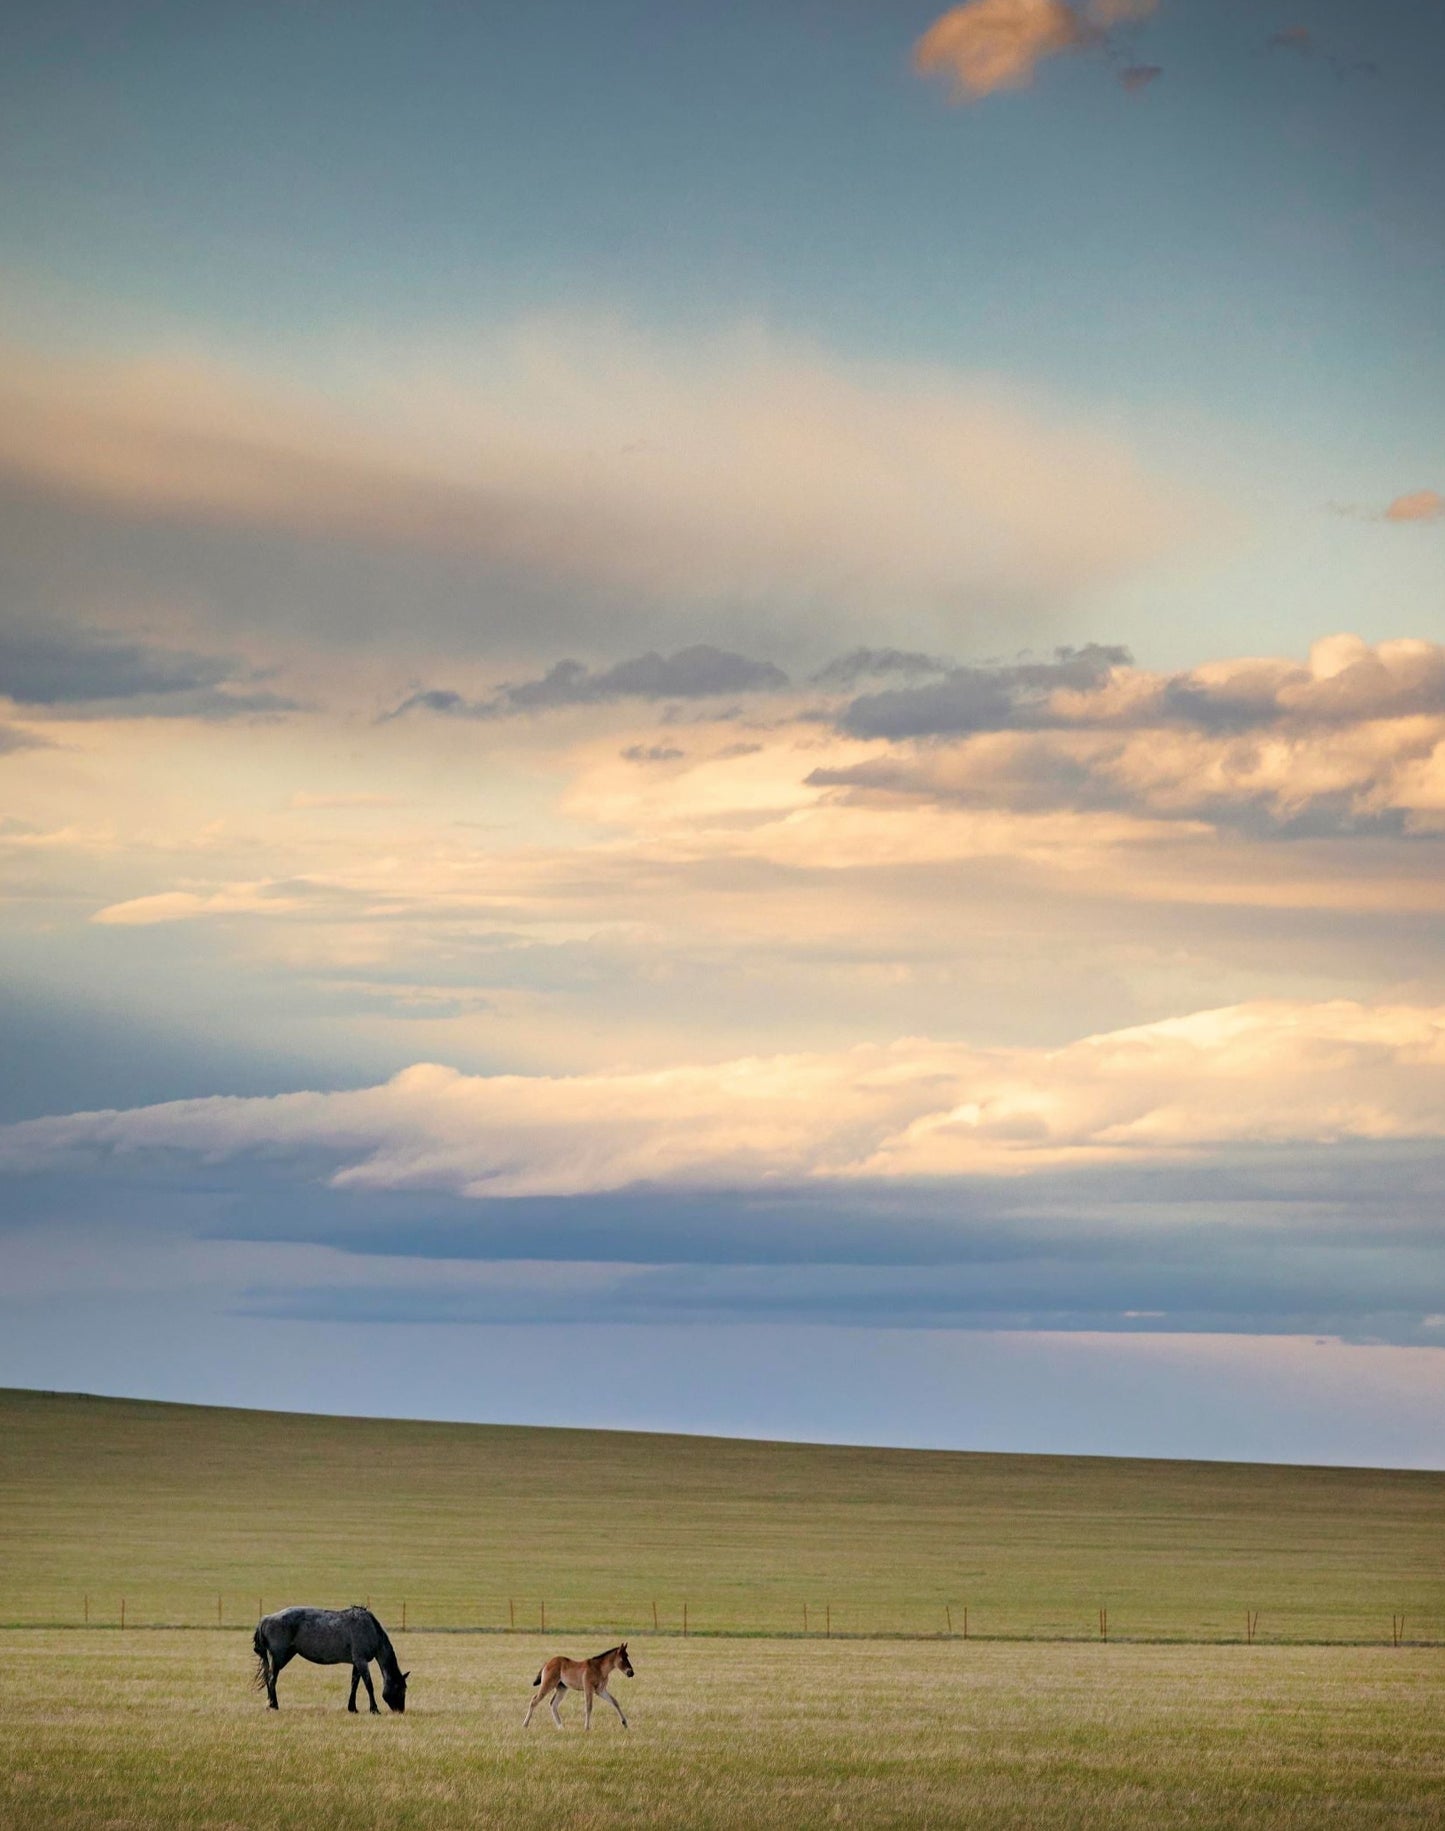 <h1>" Laramie Valley Springtime " Lustre Print<br></h1> <h2>Photographer: Kyle Spradley</h2> <p>An early Spring Sunset of a mare and foal in the Laramie Valley</p> <p>The foal explores under the Big Wyoming sky and colors of the setting sun</p> <p>8" long x 10" high</p> <p>The print comes with a black mat on the back with a protective sleeve It is ready for you to frame